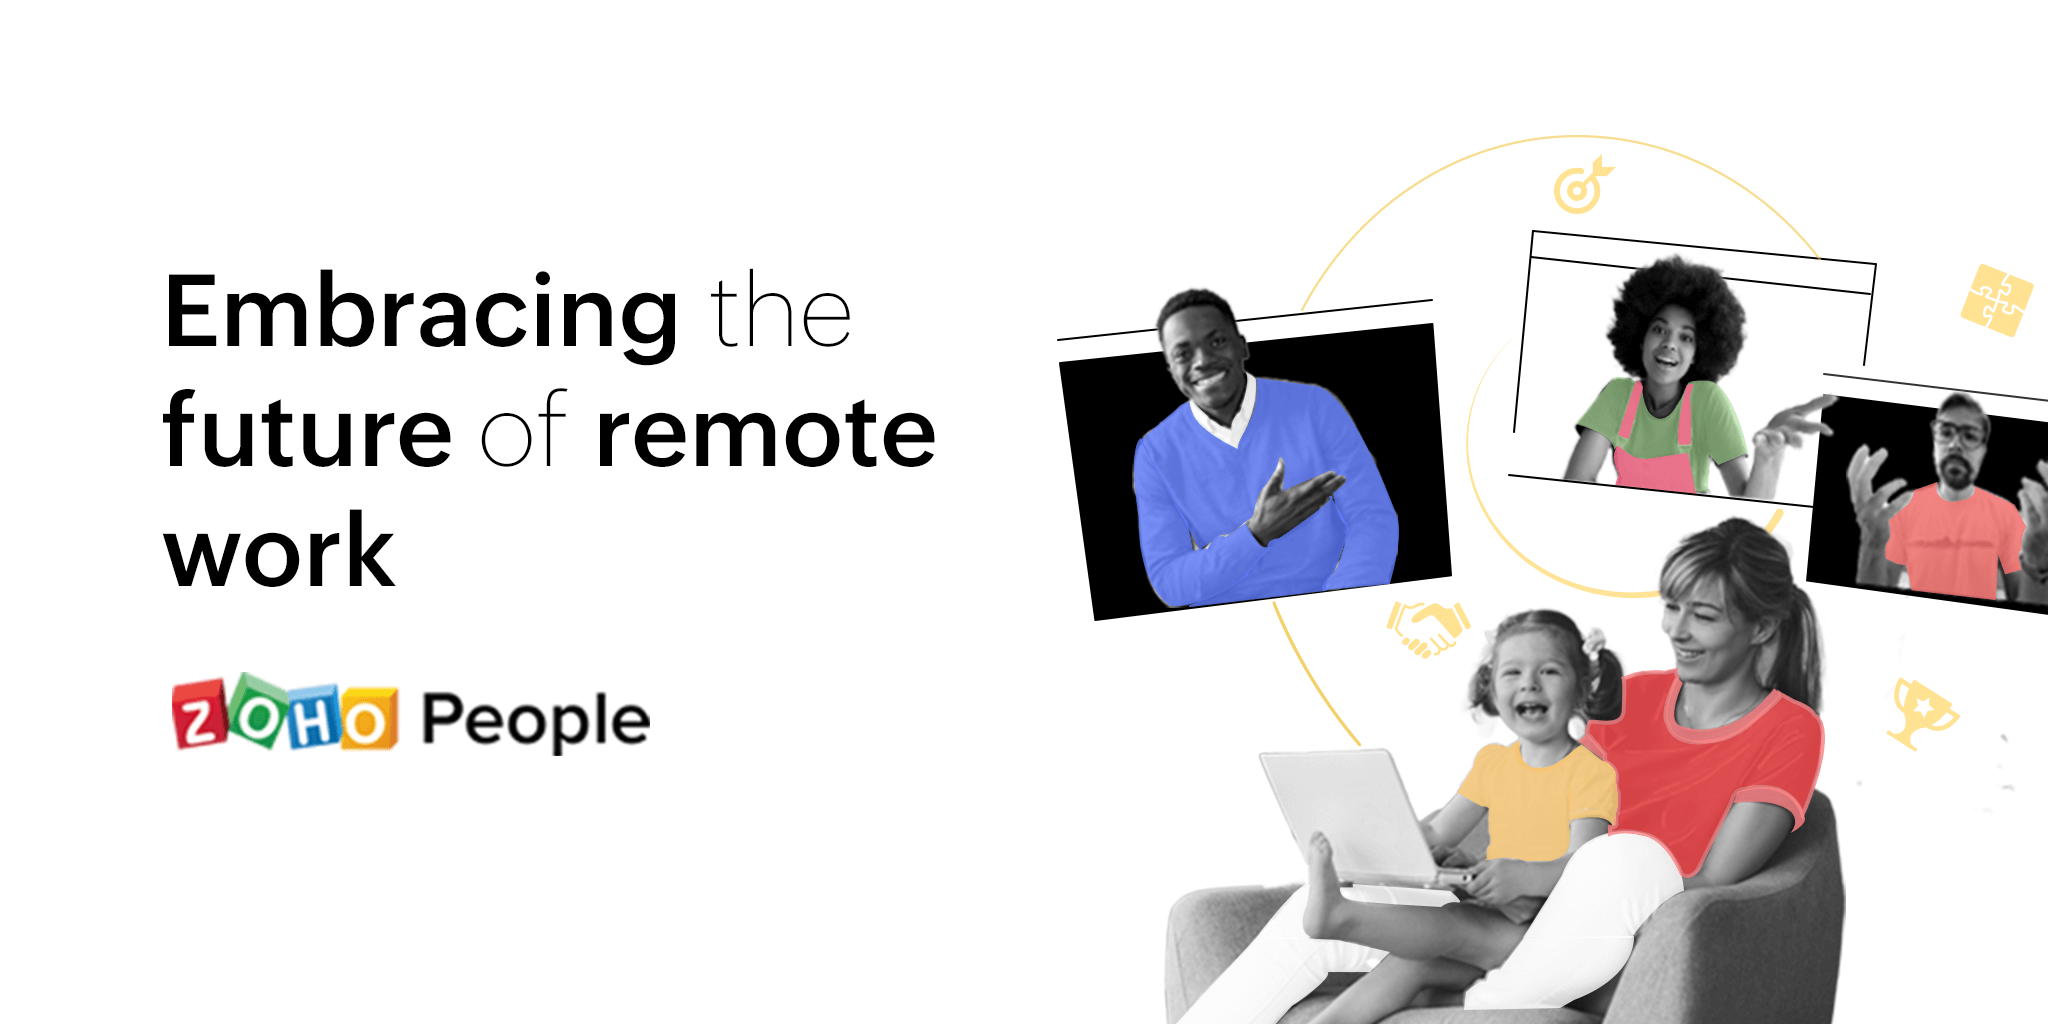 Embracing long-term remote work in your organization